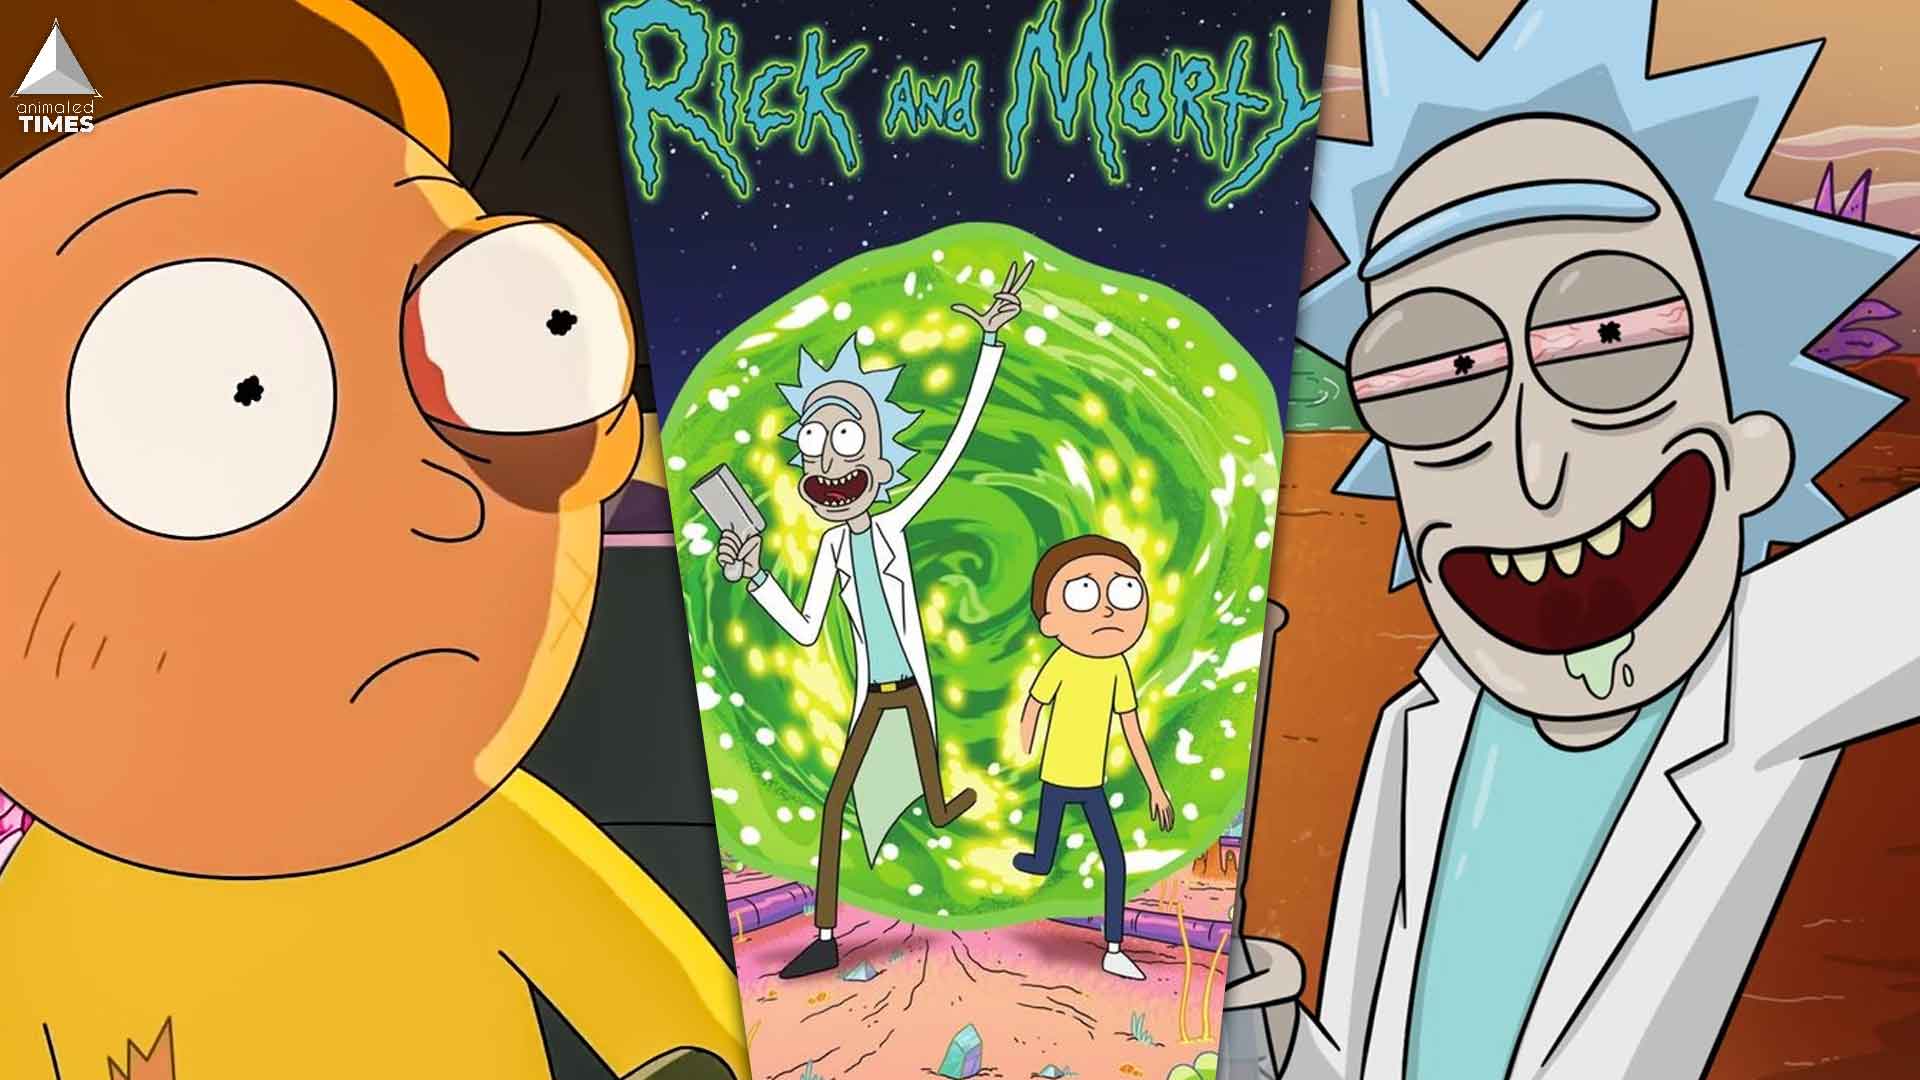 Rick and Morty: Everything We Know About The Evil Morty Before Going Into Season 5